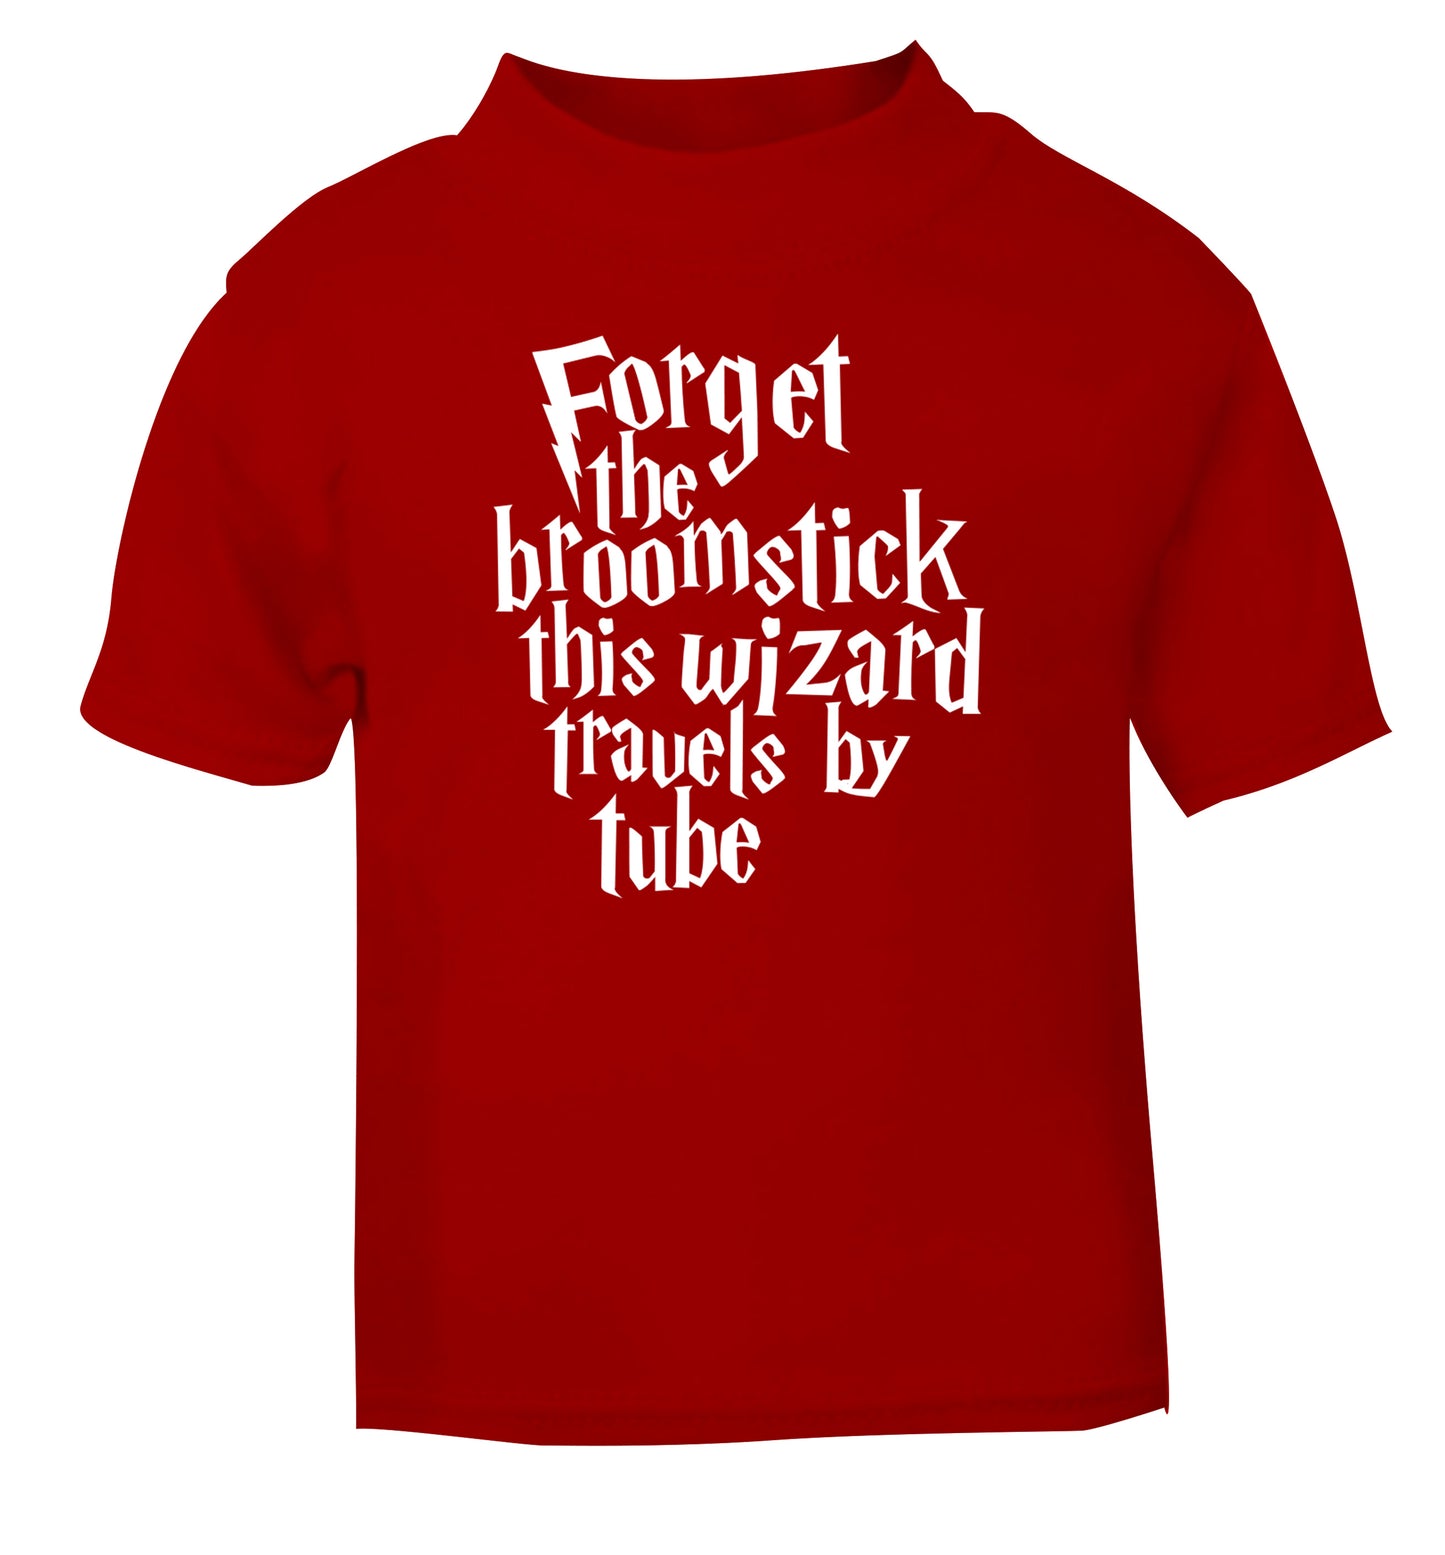 Forget the broomstick this wizard travels by tube red Baby Toddler Tshirt 2 Years